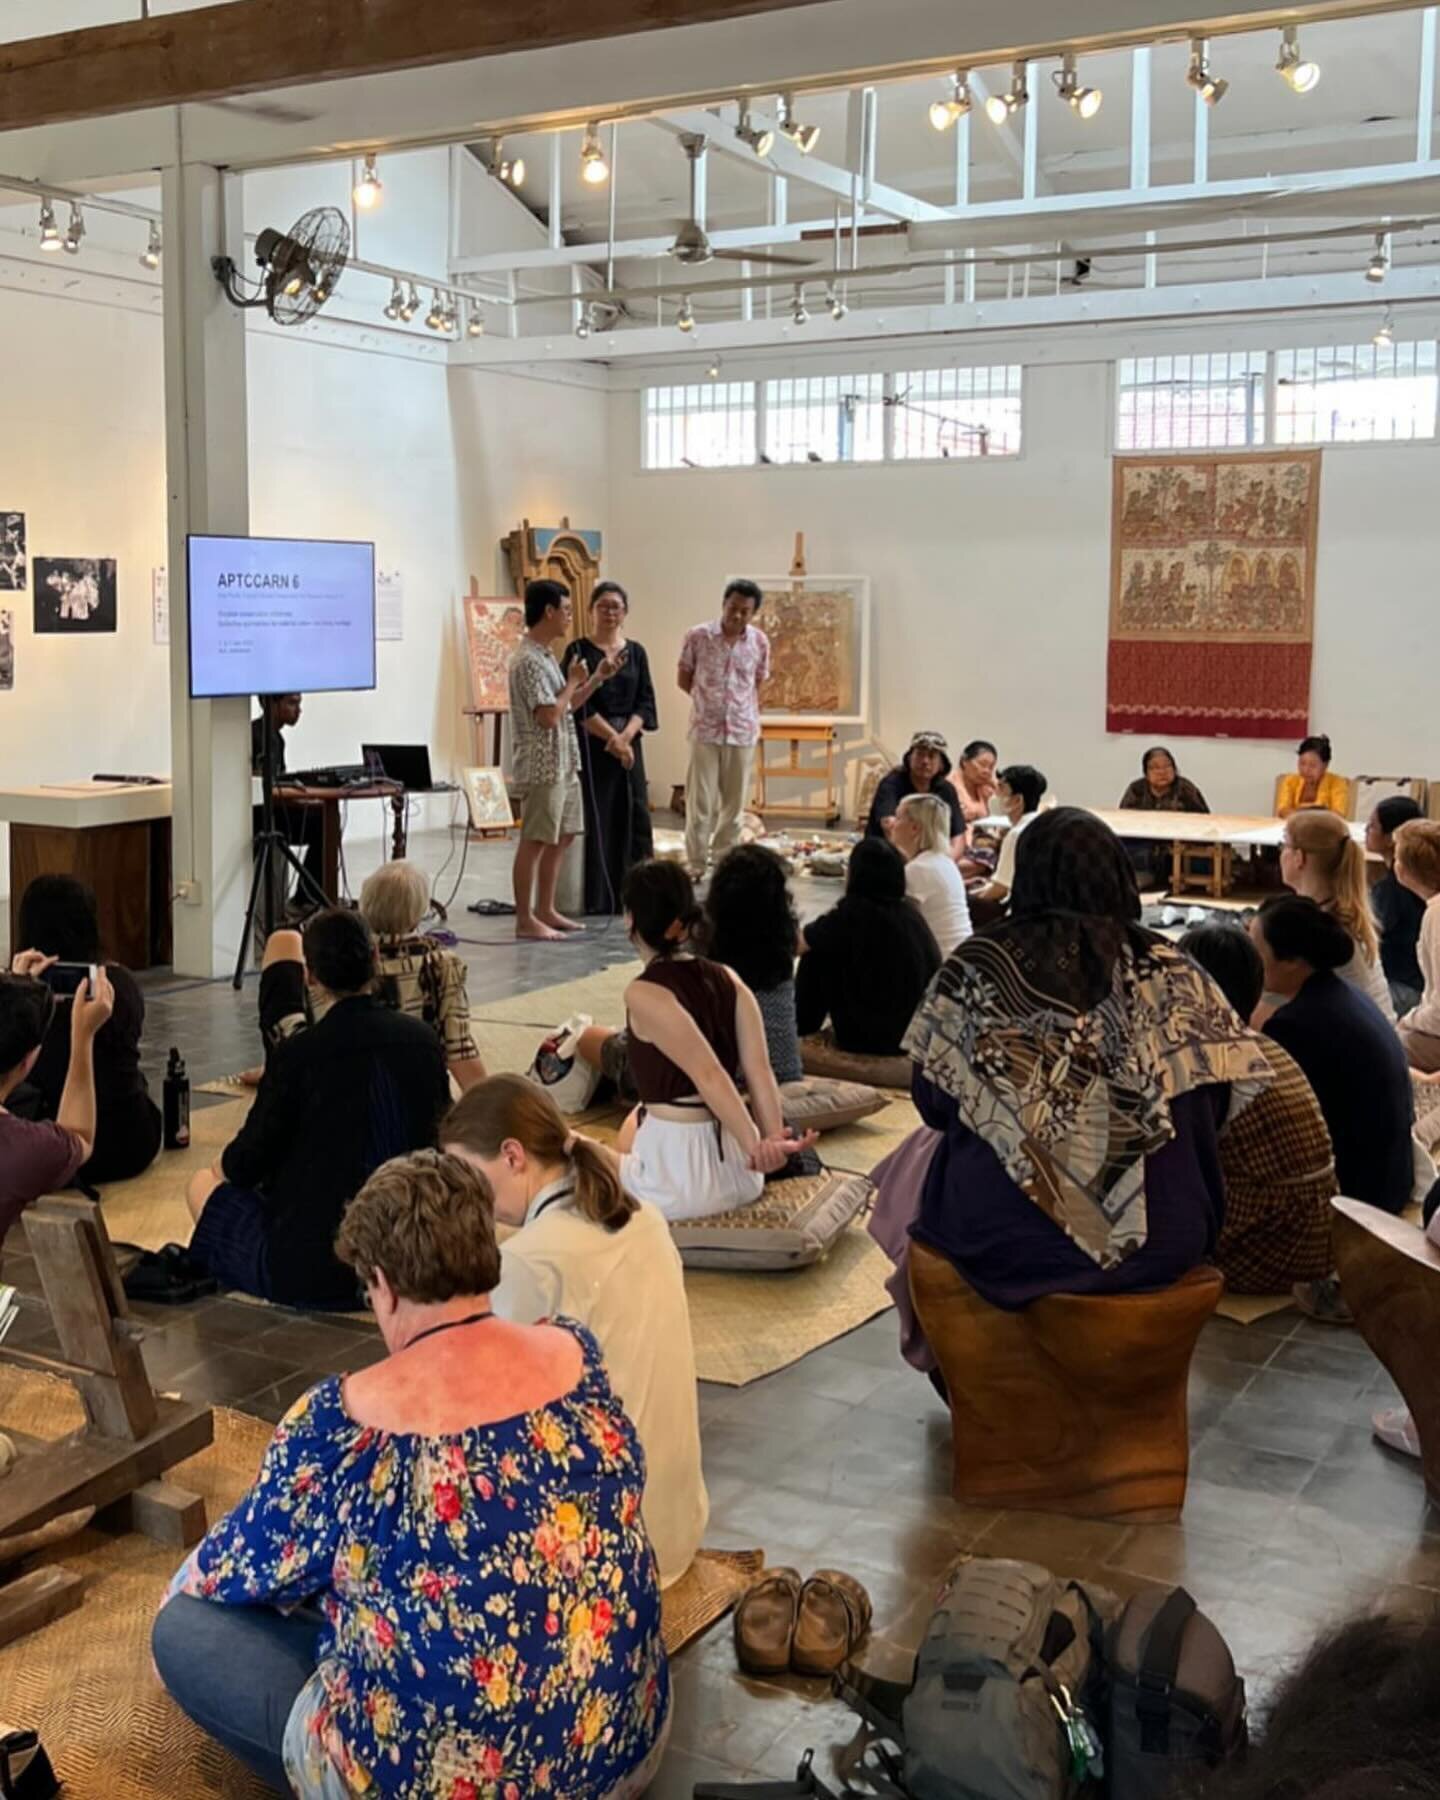 After the panel presentations we made our way by bus from Ubud to Denpasar, where Day 2 of the program concluded at @cushcushgallery_bali. Here, APTCCARN6 participants had the opportunity to listen to a lecture on traditional Balinese art making and 